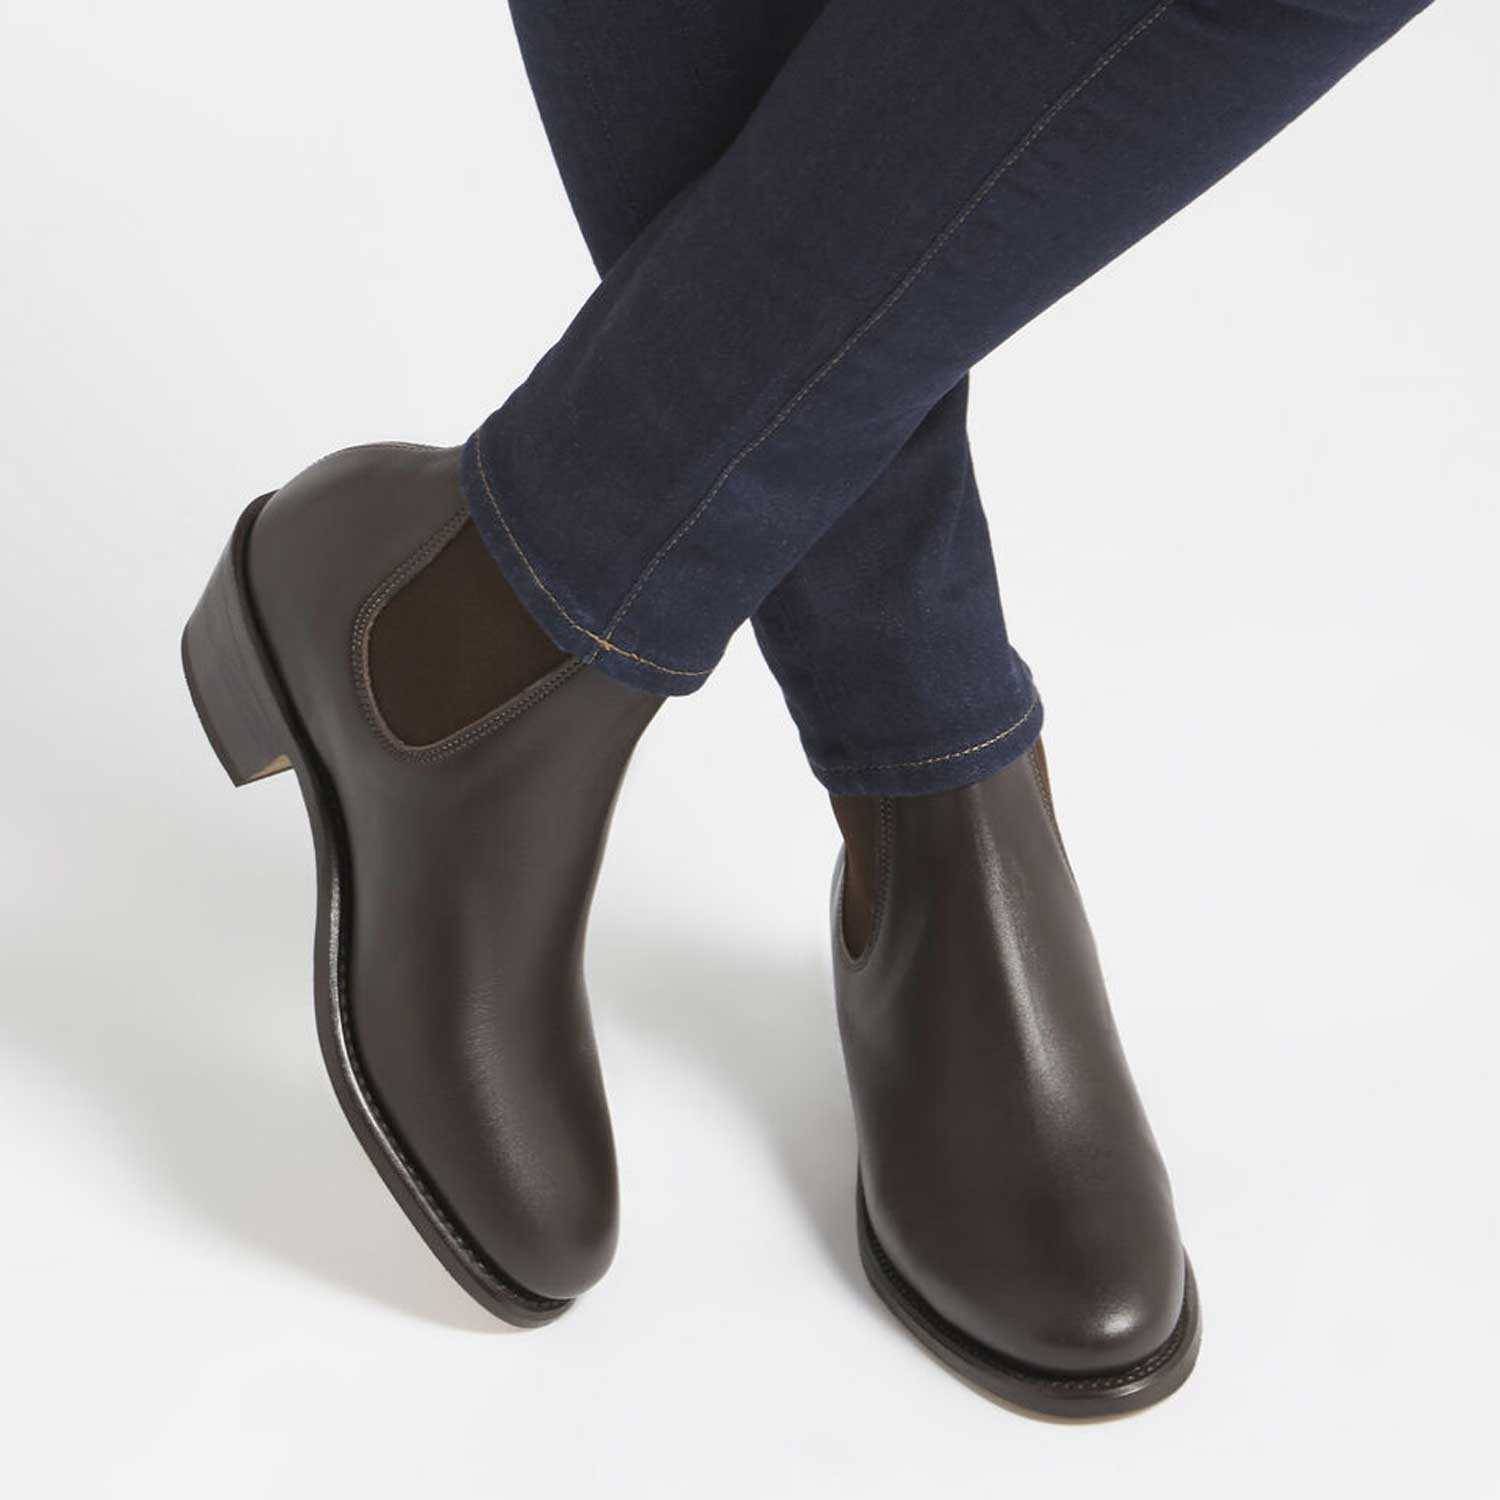 RM Williams Ladies Boots & Accessories – A Farley